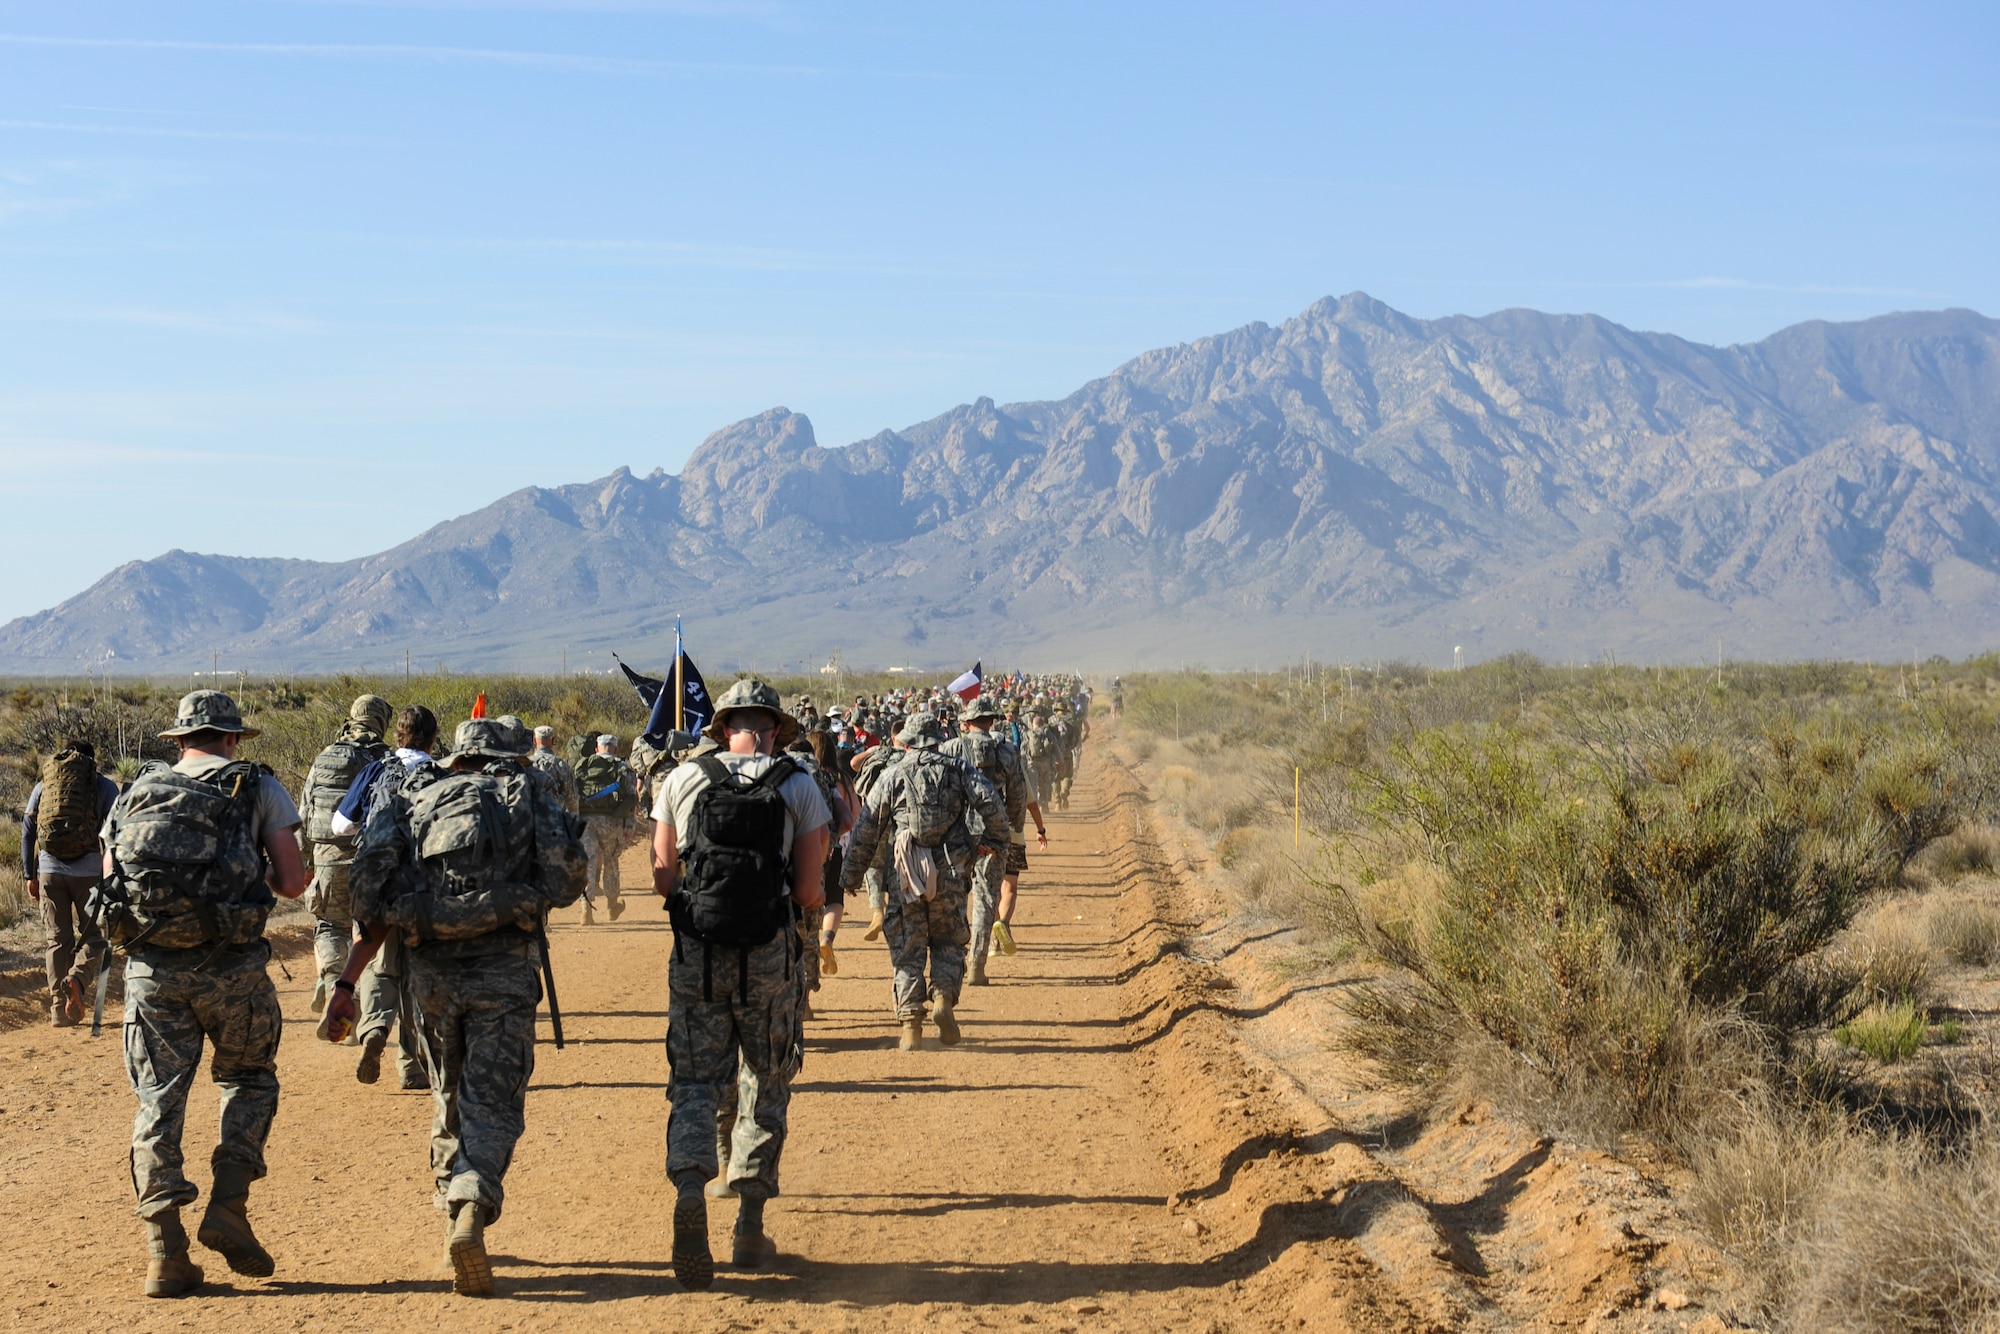 U.S. Air Force Airmen, carrying 35-lb. rucksacks, participate in the 2016 Bataan Memorial Death March with 6,600 other participants, March 20, 2016, at White Sands Missile Range, N.M. The 27th annual march was 26.2 miles long and served as a reminder for today’s generation of the harsh conditions World War II veterans endured during their 60-mile march to a prisoner-of-war camp in the Philippines. (U.S. Air Force photo by Senior Airman Harry Brexel)